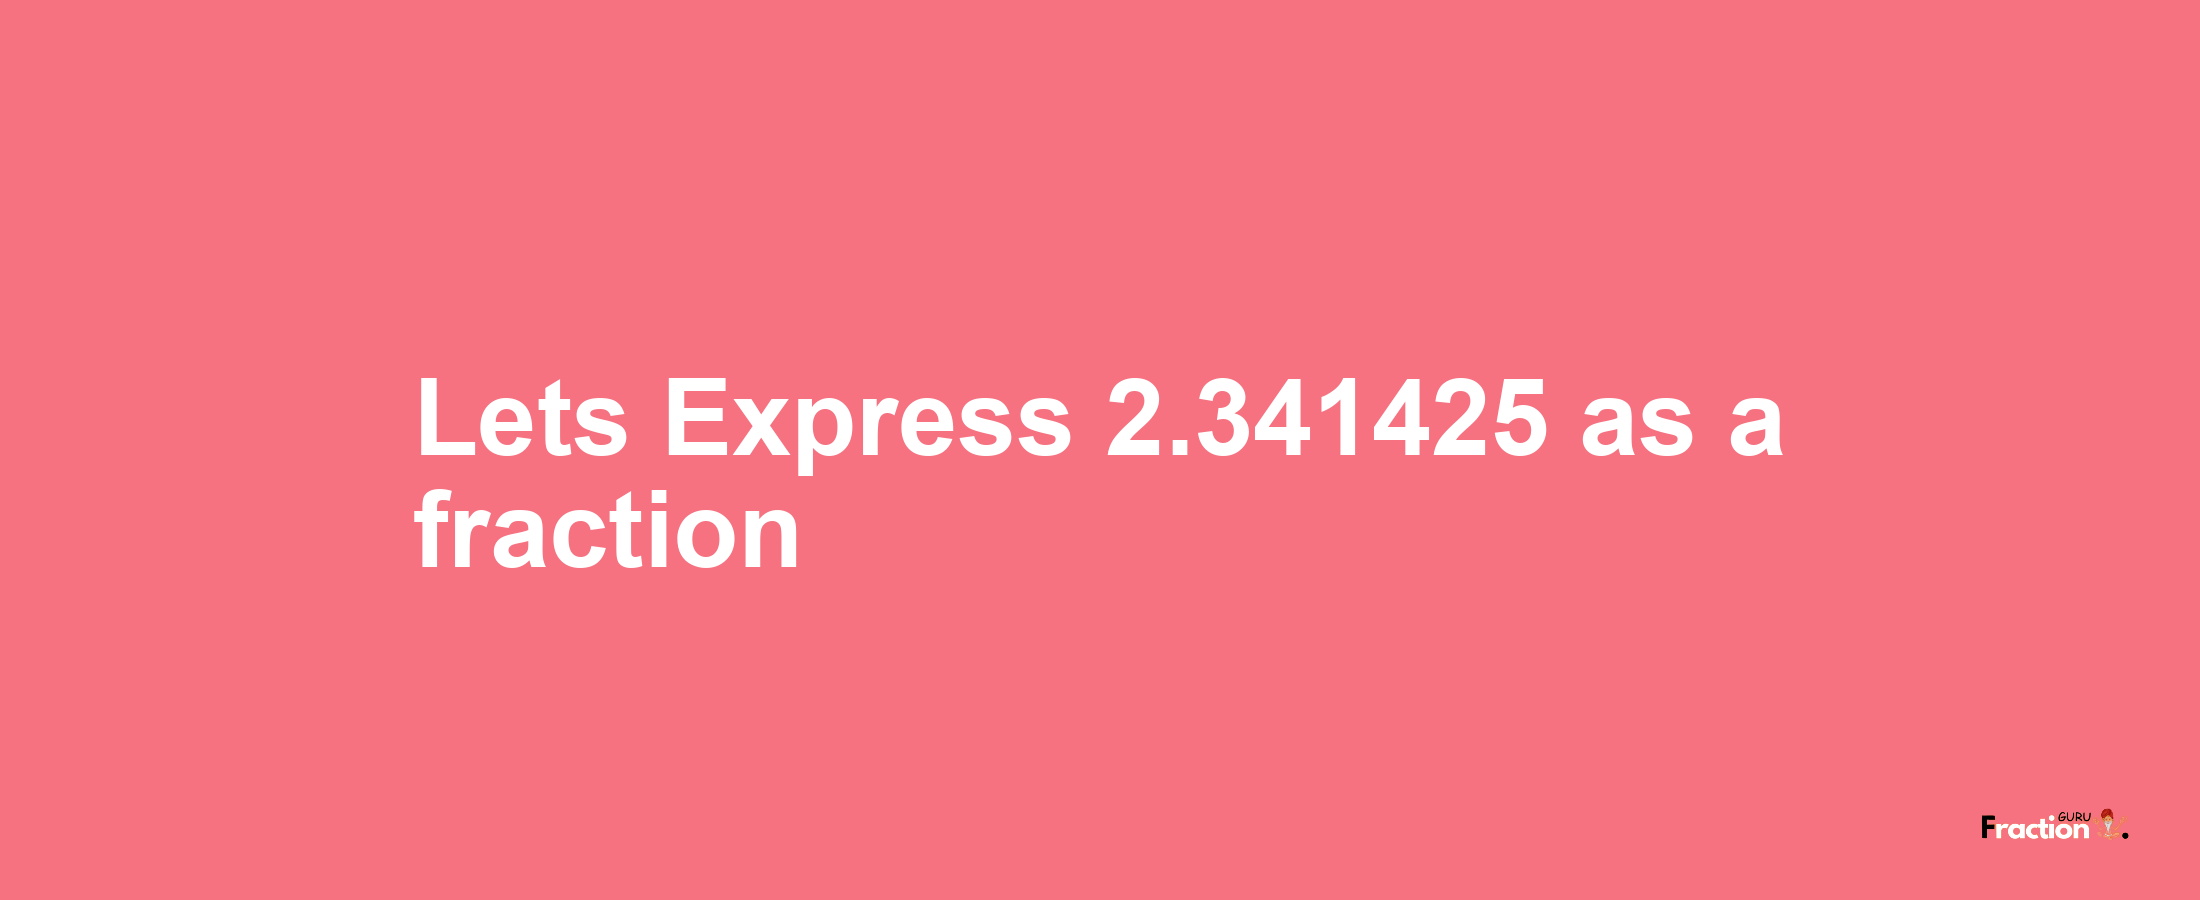 Lets Express 2.341425 as afraction